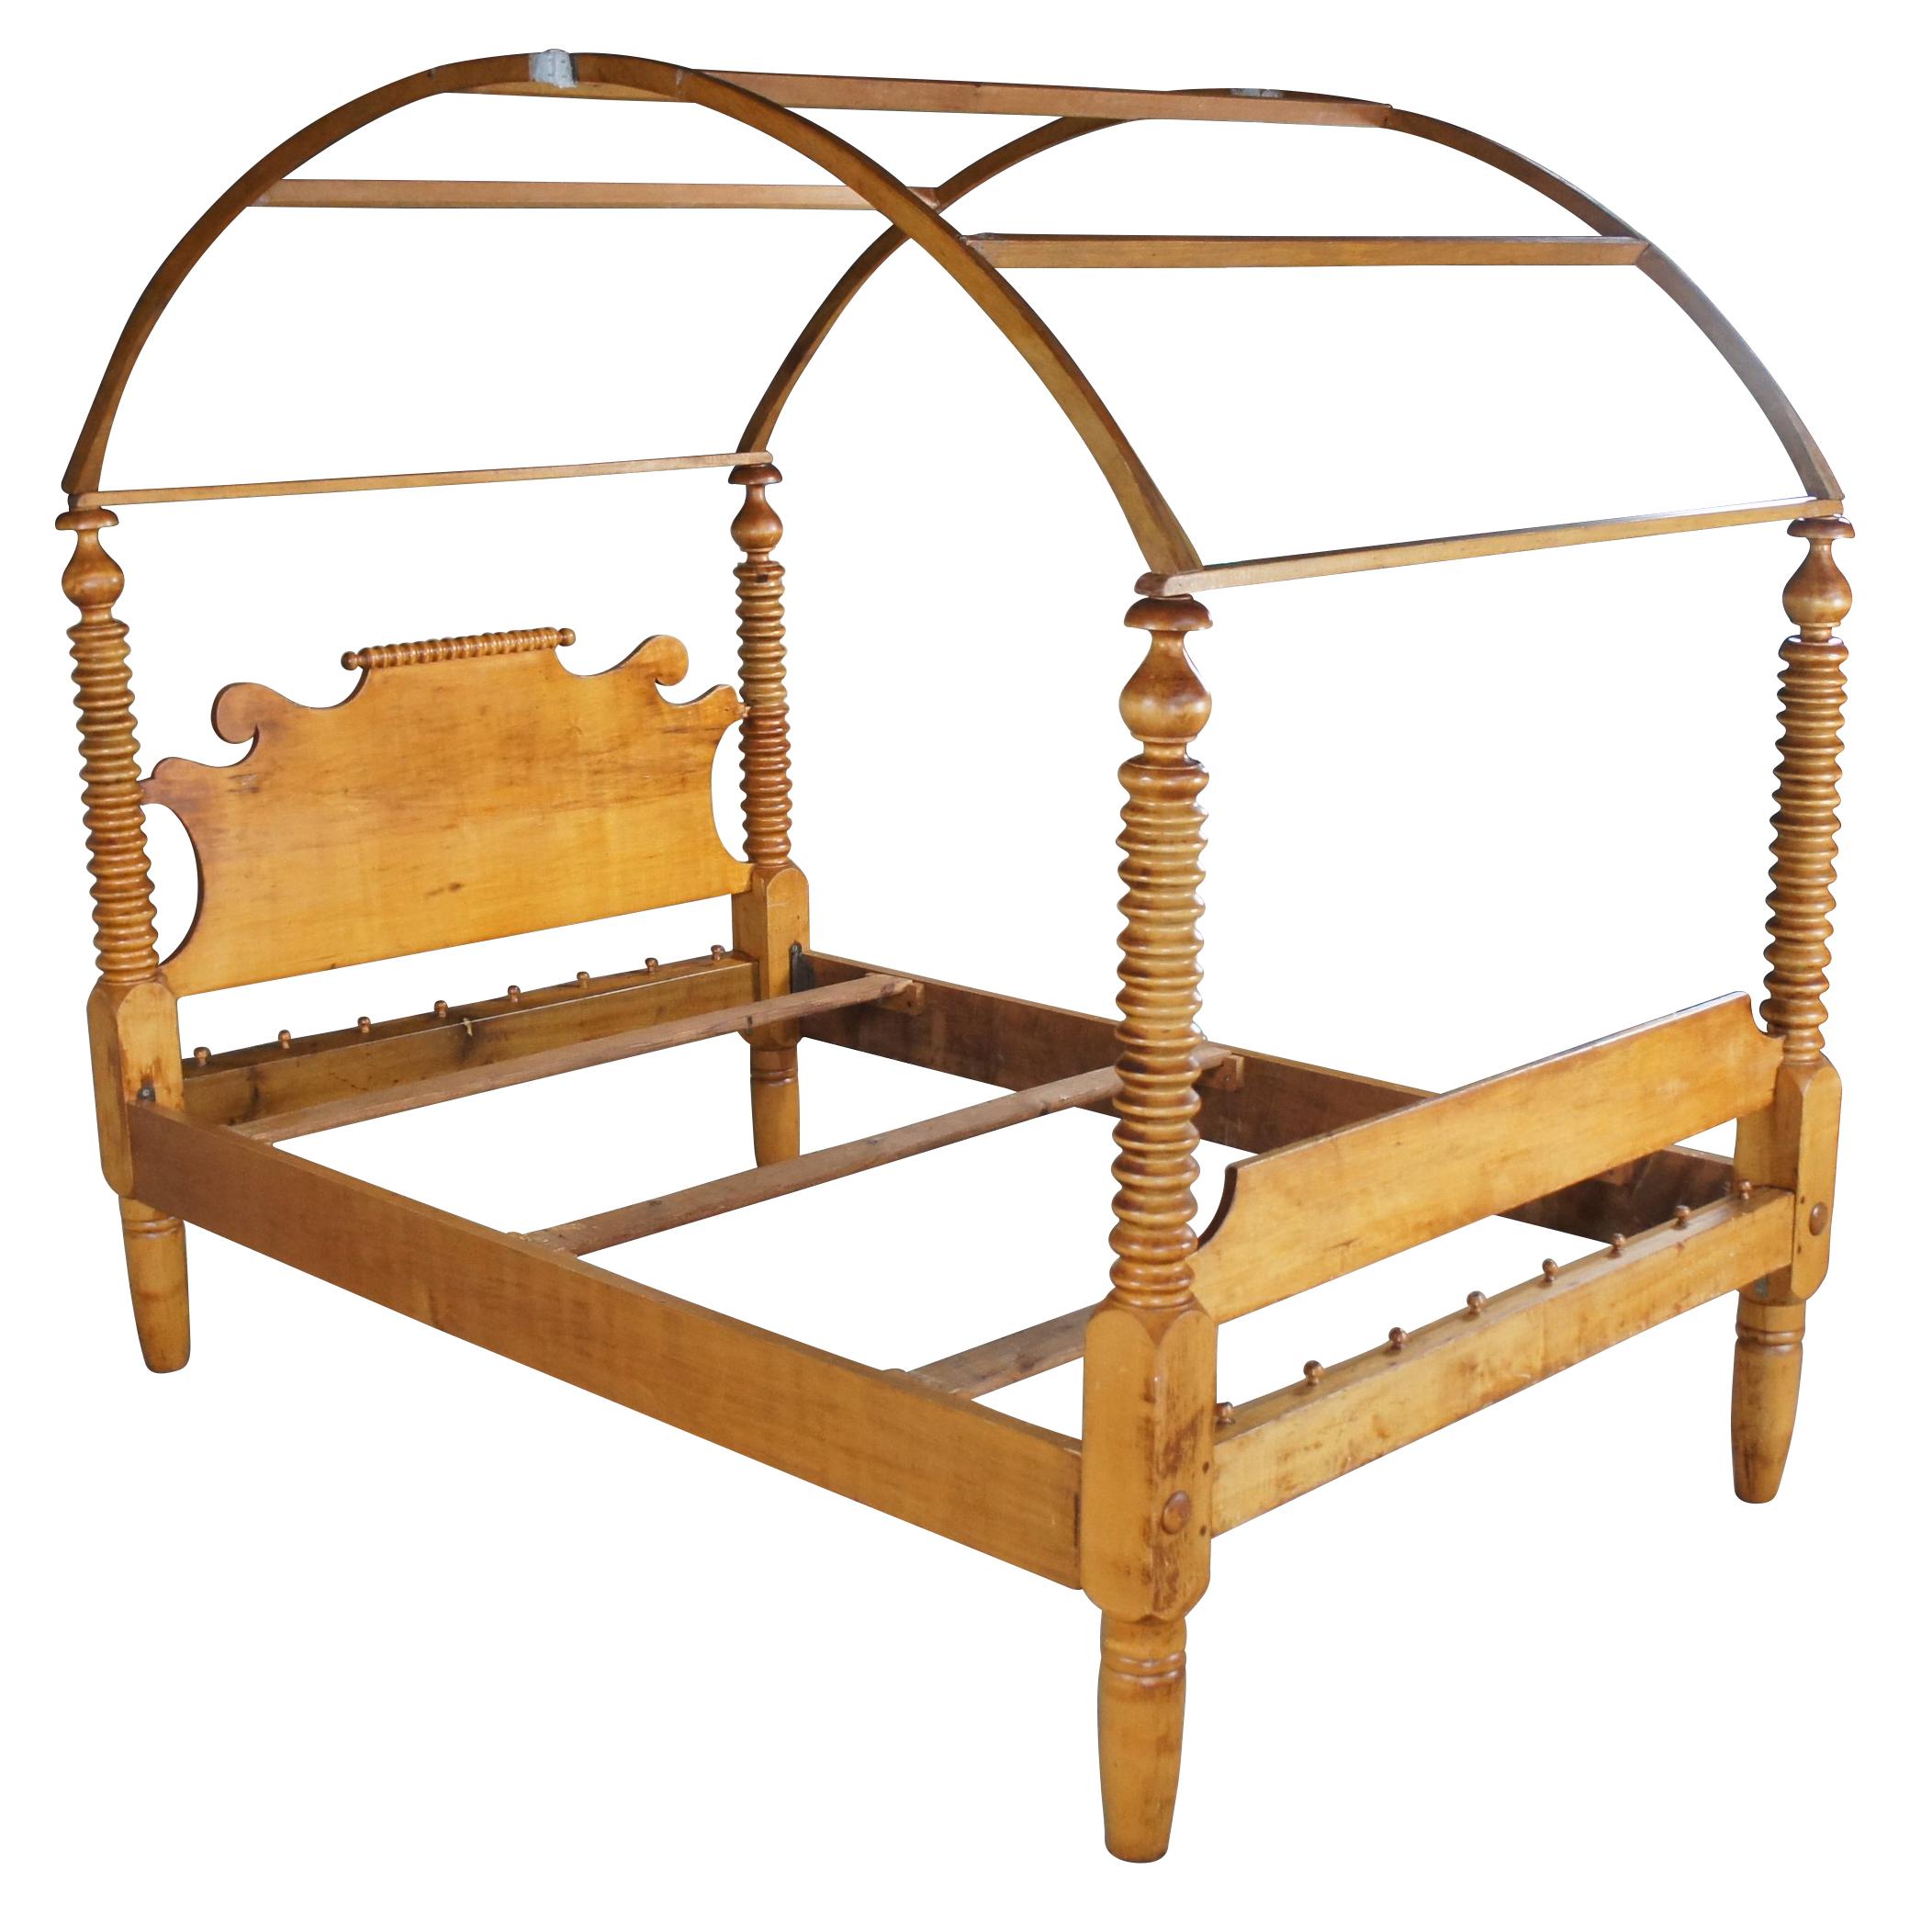 An impressive antique Jenny Lind rope / spool bed with canopy. Made from maple with turned and ribbed posts. The arched canopy can be removed for use without. The bed is supported by peg legs. A charming addition to any space.

DIMENSIONS

73.5